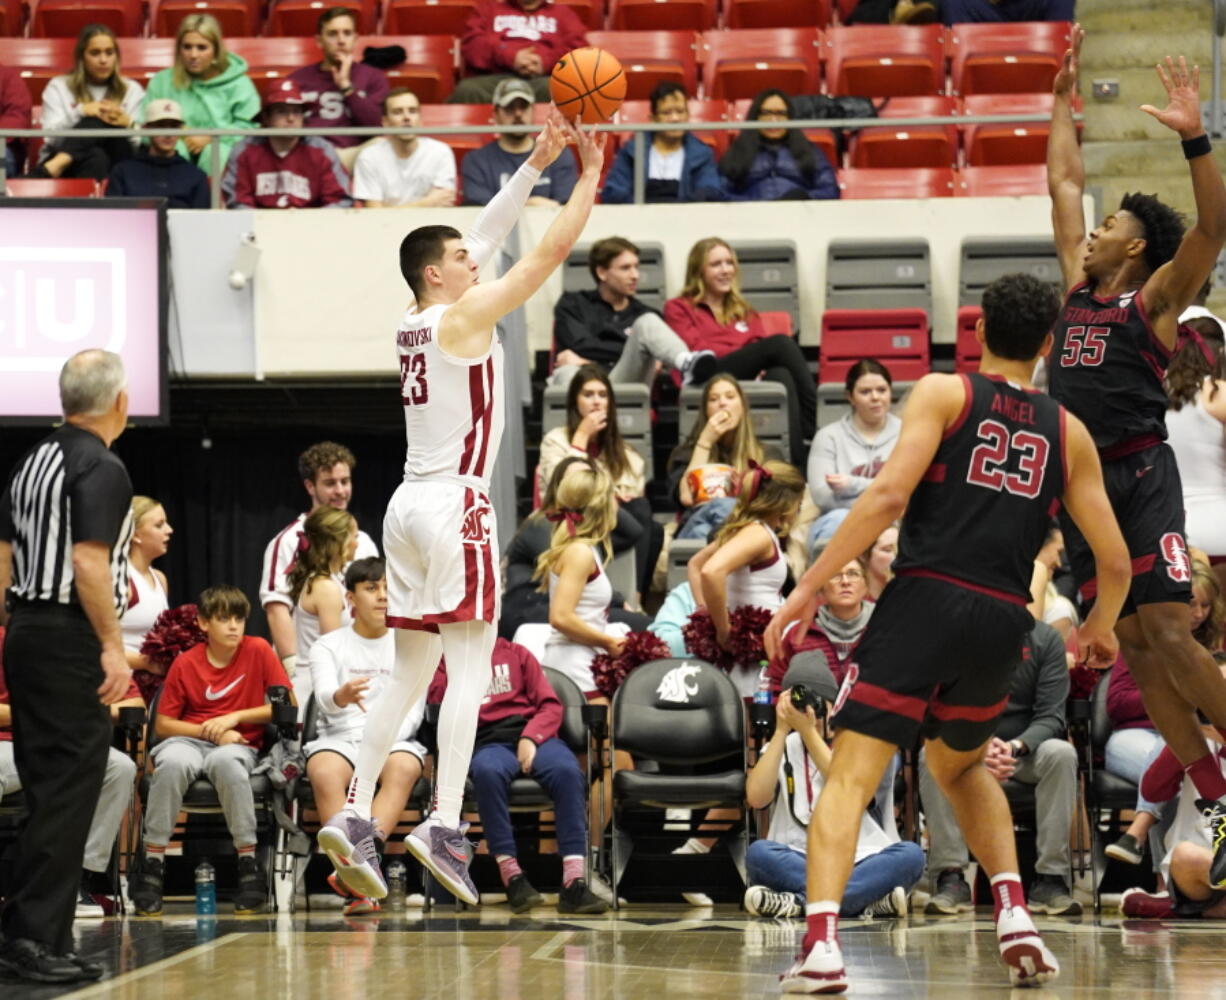 Washington State forward Andrej Jakimovski, center left, attempts a 3-point shot over Stanford forward Harrison Ingram (55) as forward Brandon Angel, center, watches during the first half of an NCAA college basketball game in Pullman, Wash., Saturday, Jan. 14, 2023.